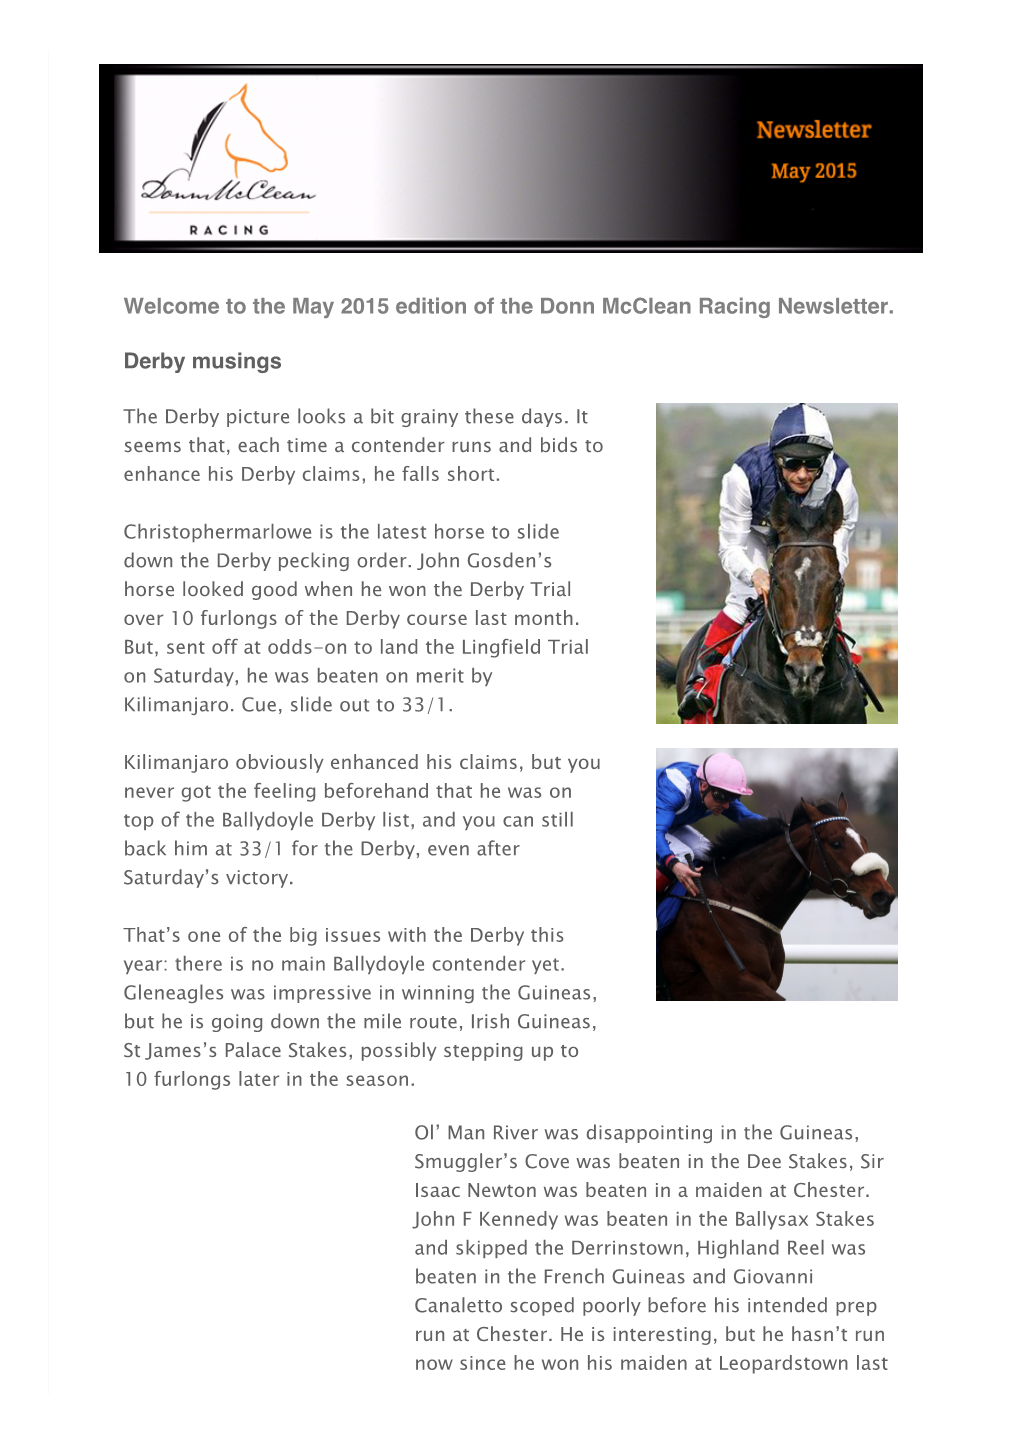 The May 2015 Edition of the Donn Mcclean Racing Newsletter